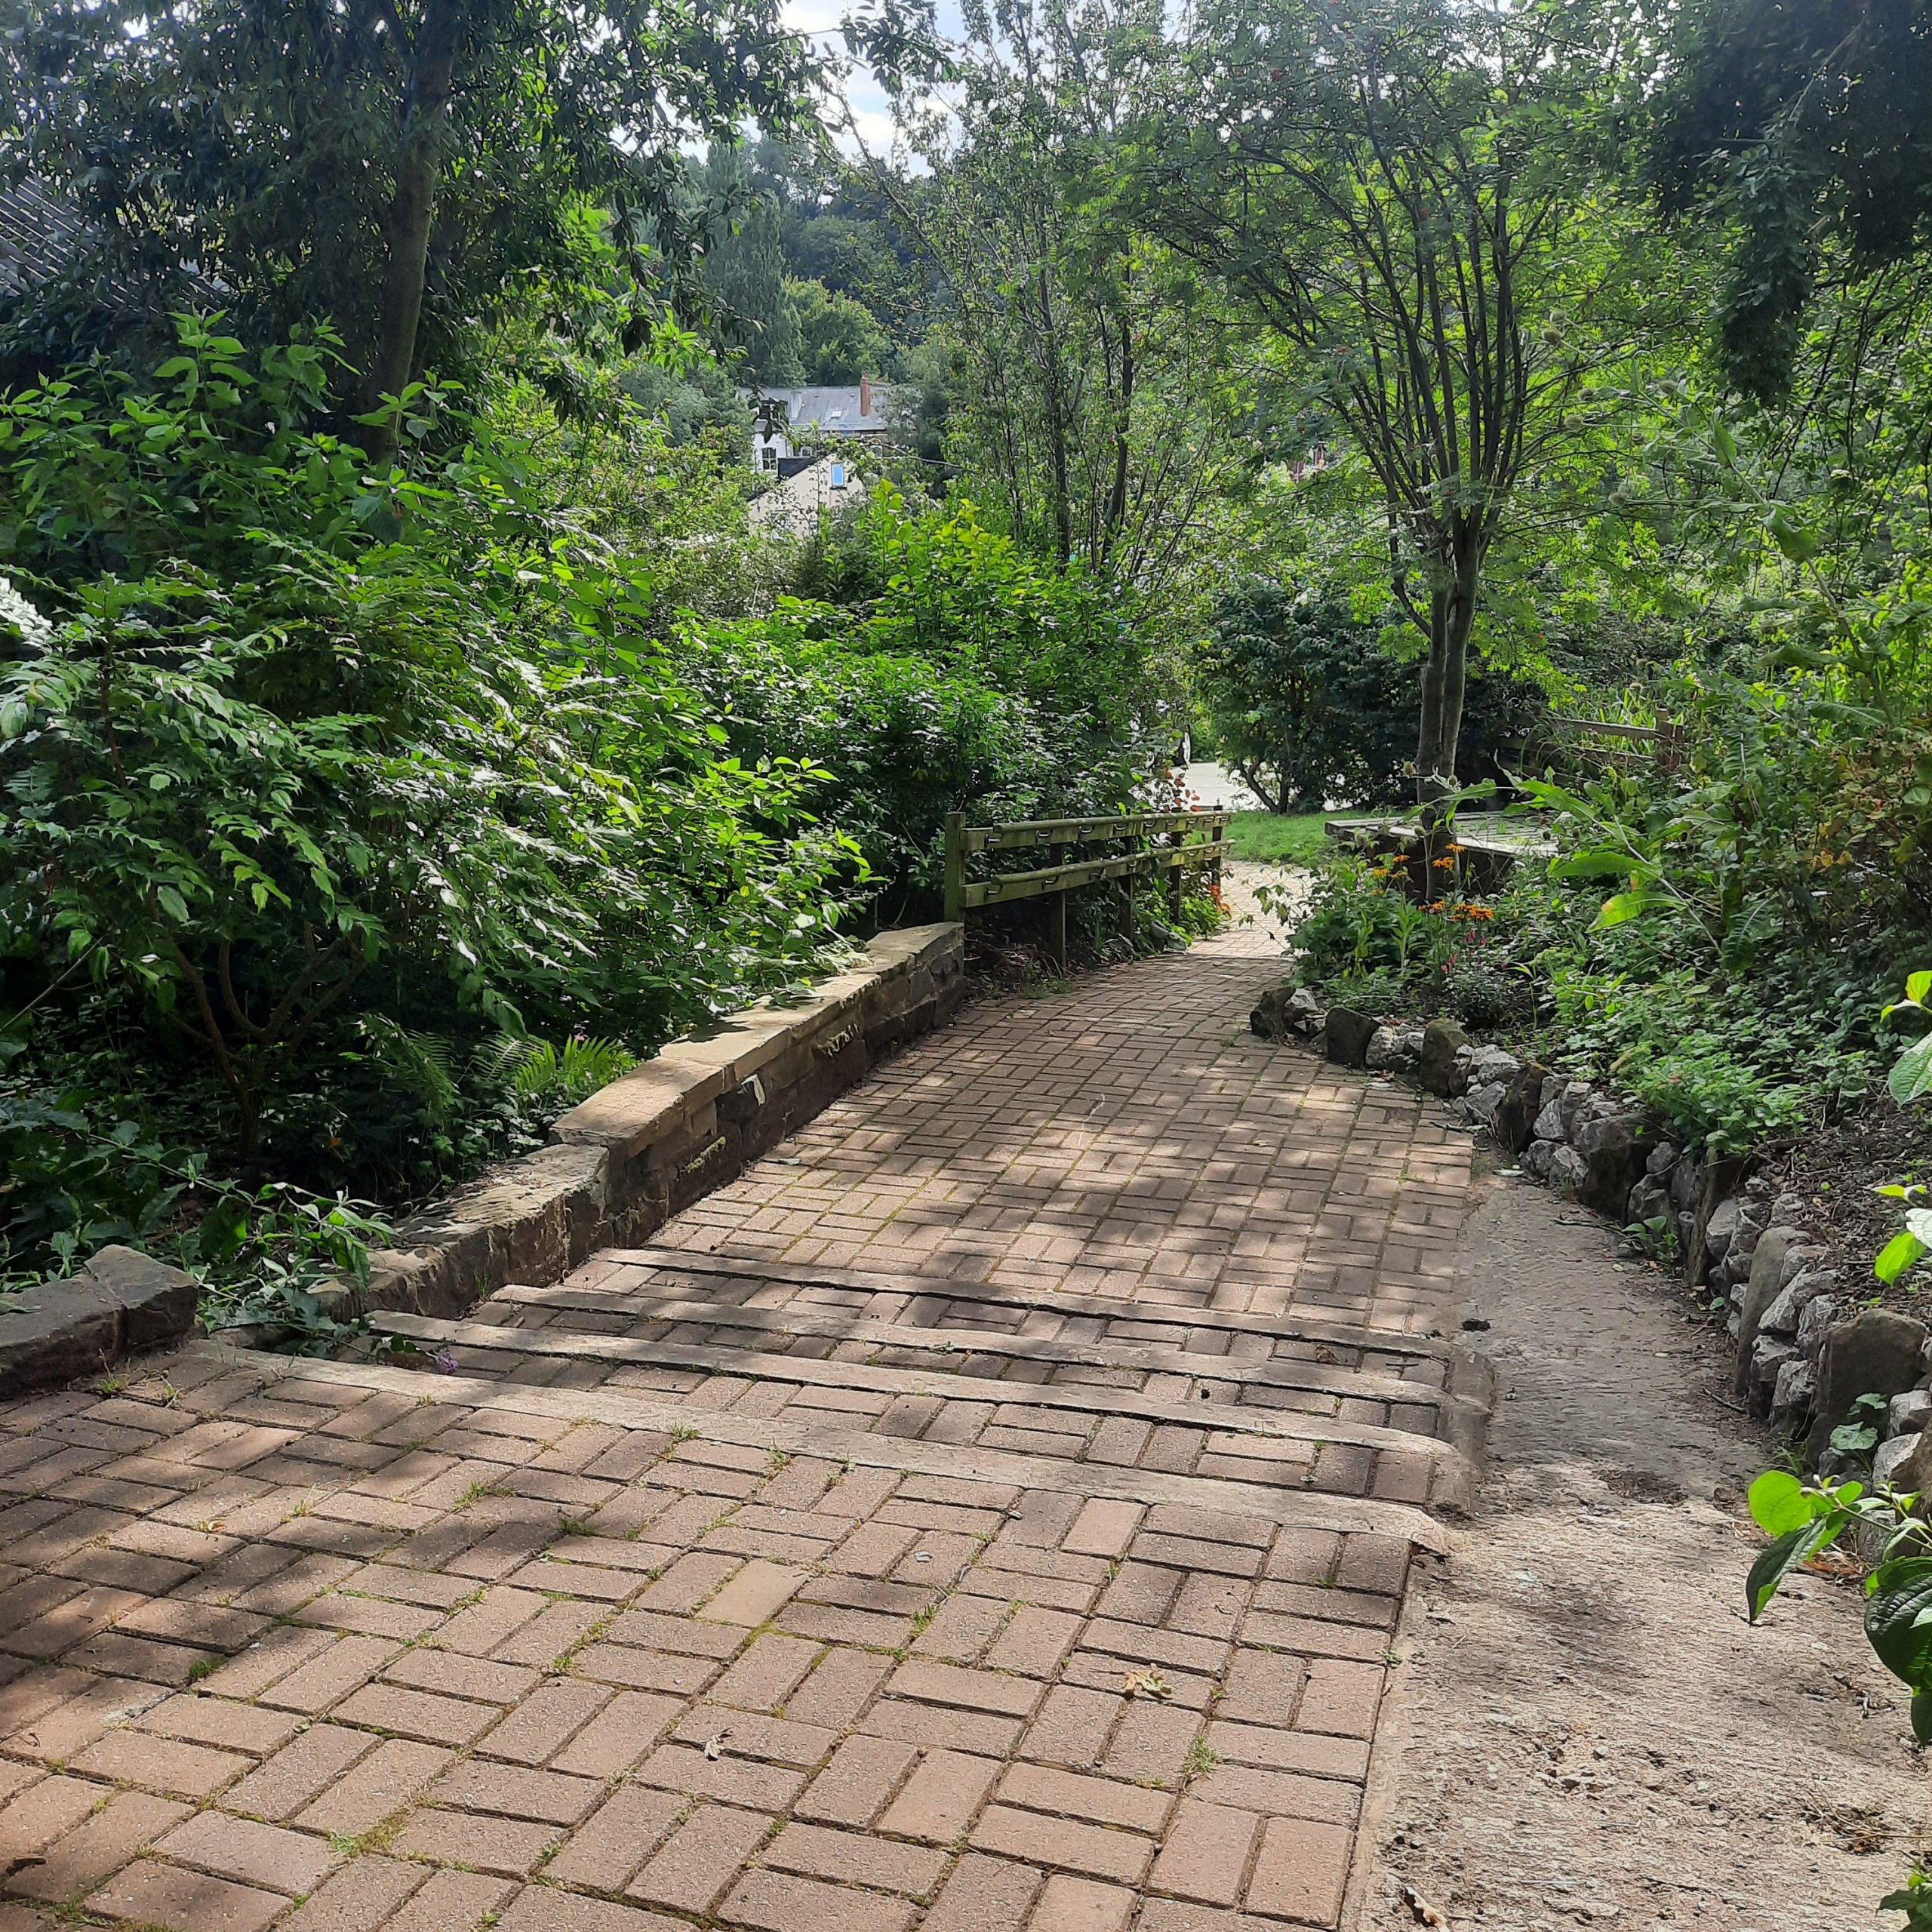 Image of a path at Meanwood Urban Farm showing some unevenness and sharp incline